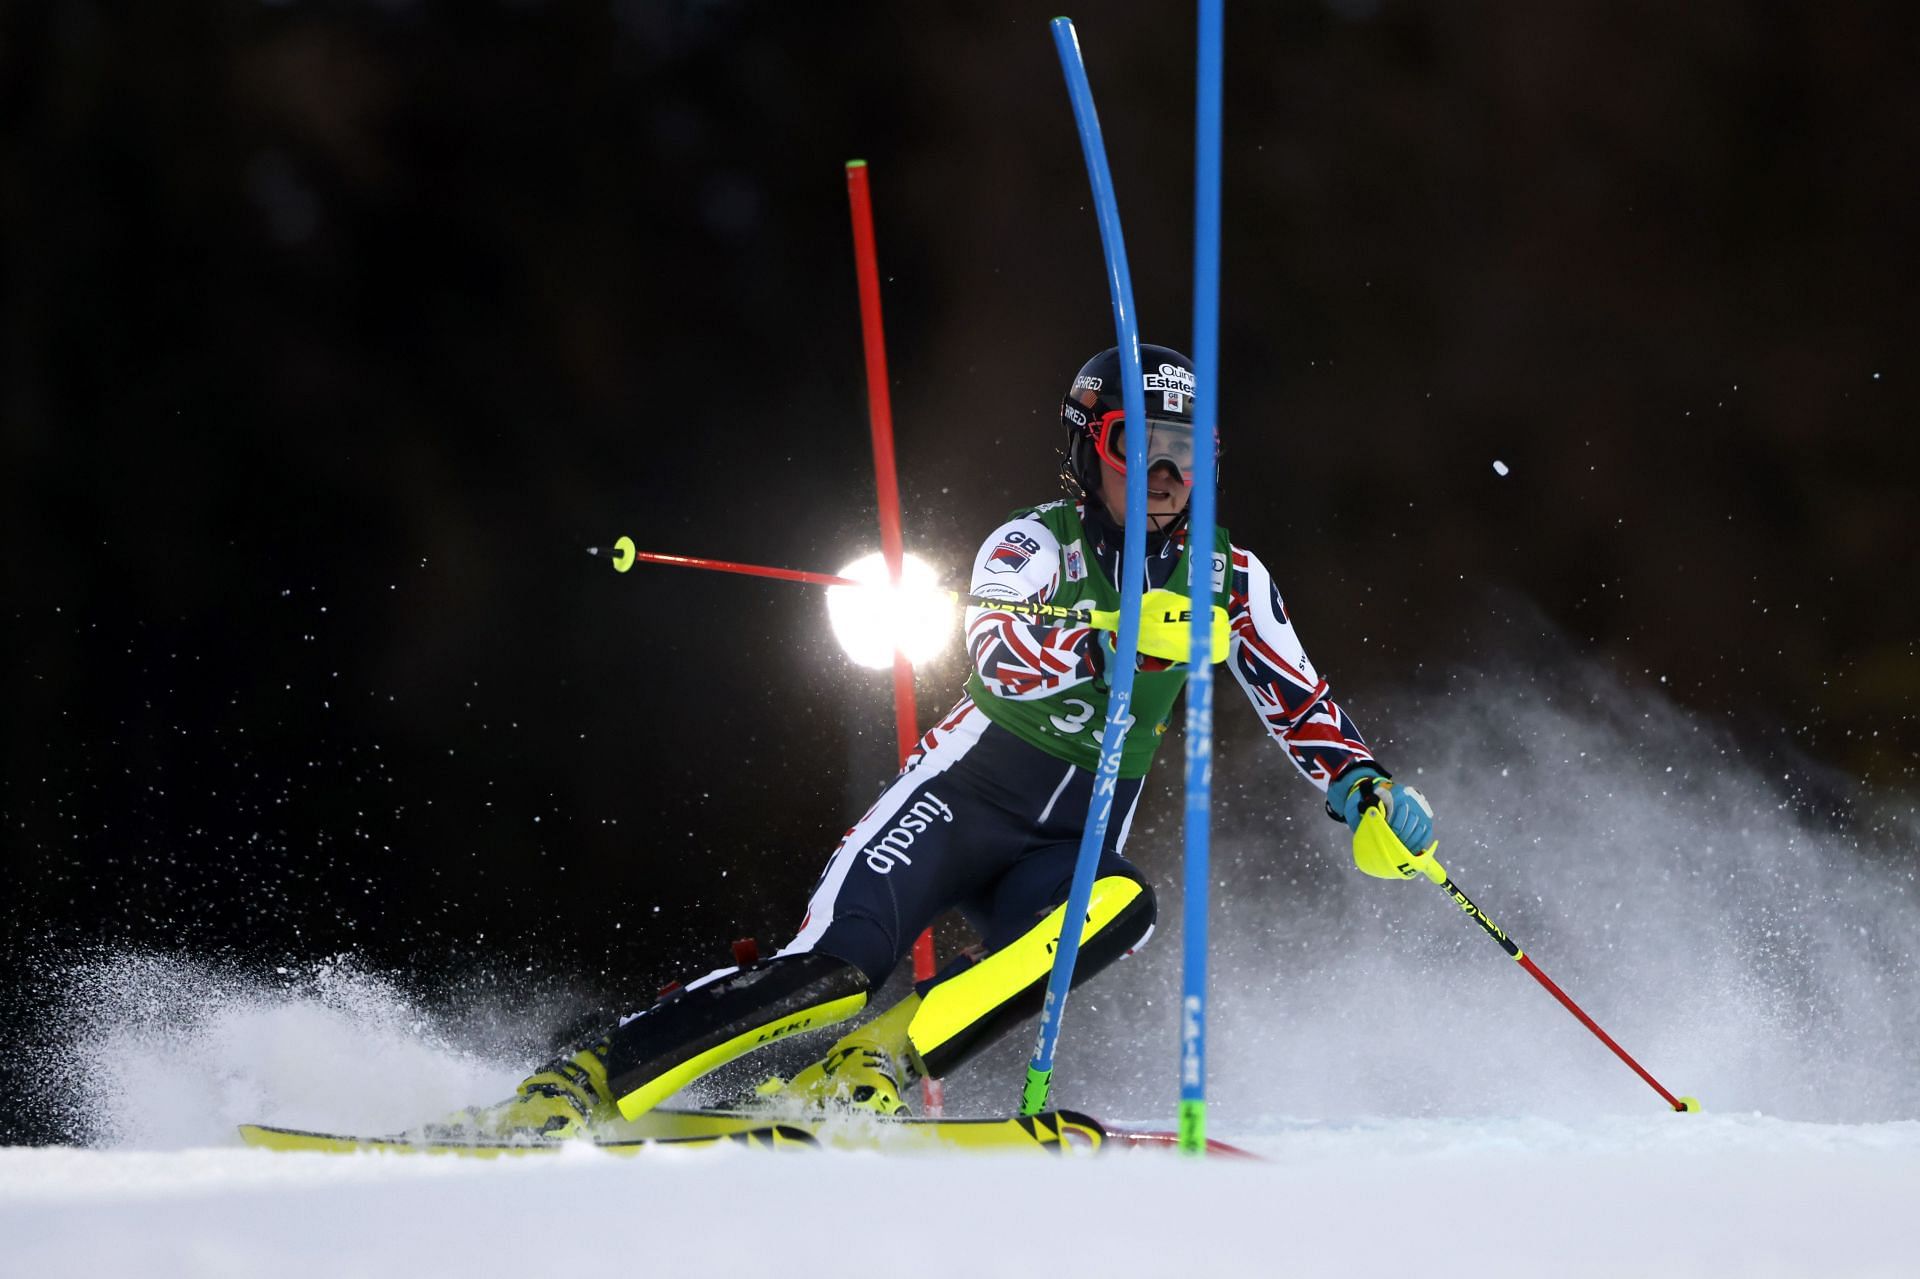 2022/23 Alpine Ski World Cup Schedule, field and where to watch